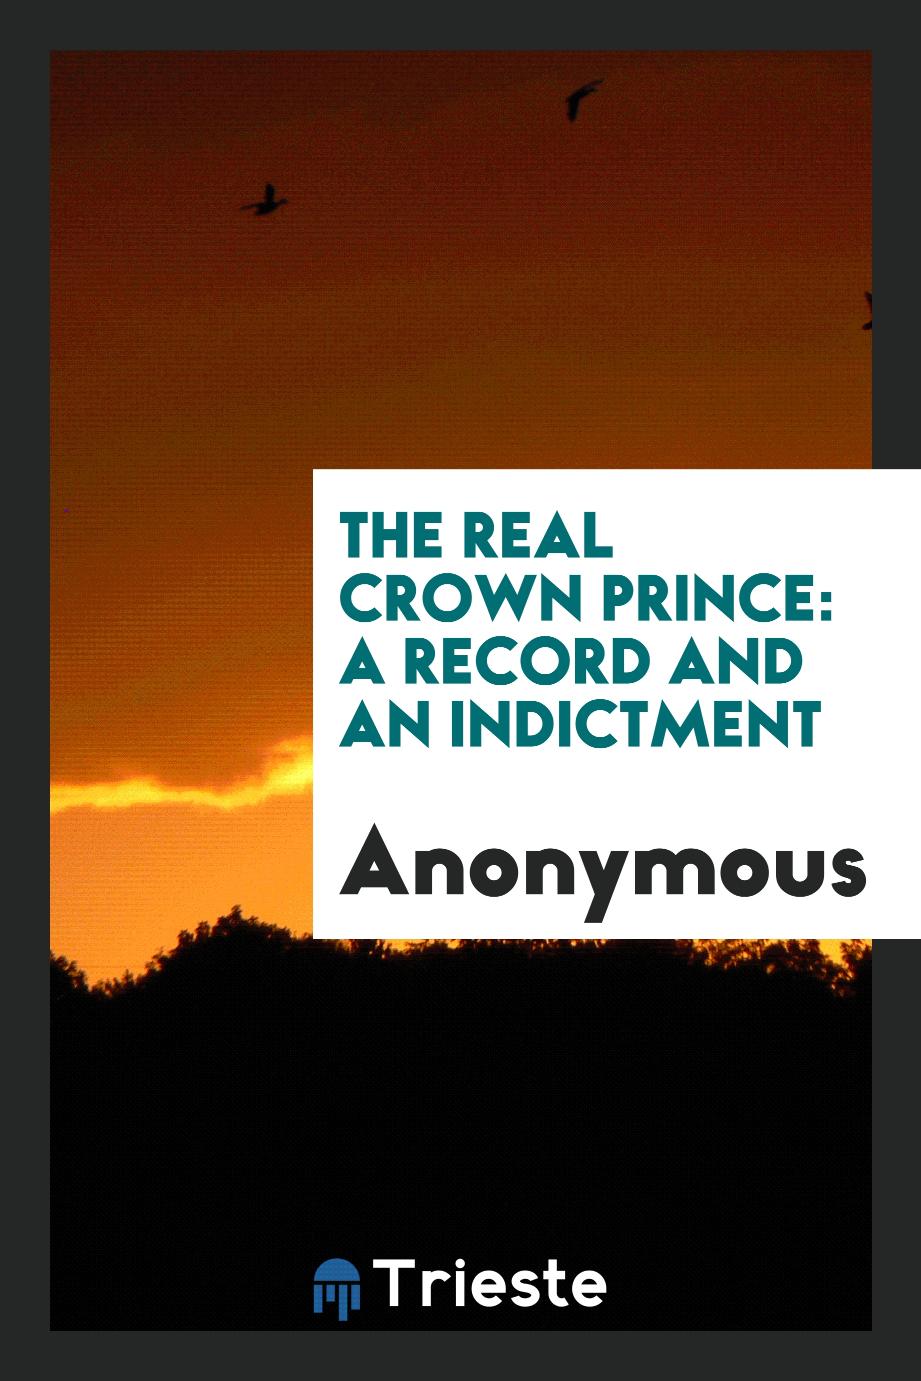 The real Crown Prince: a record and an indictment